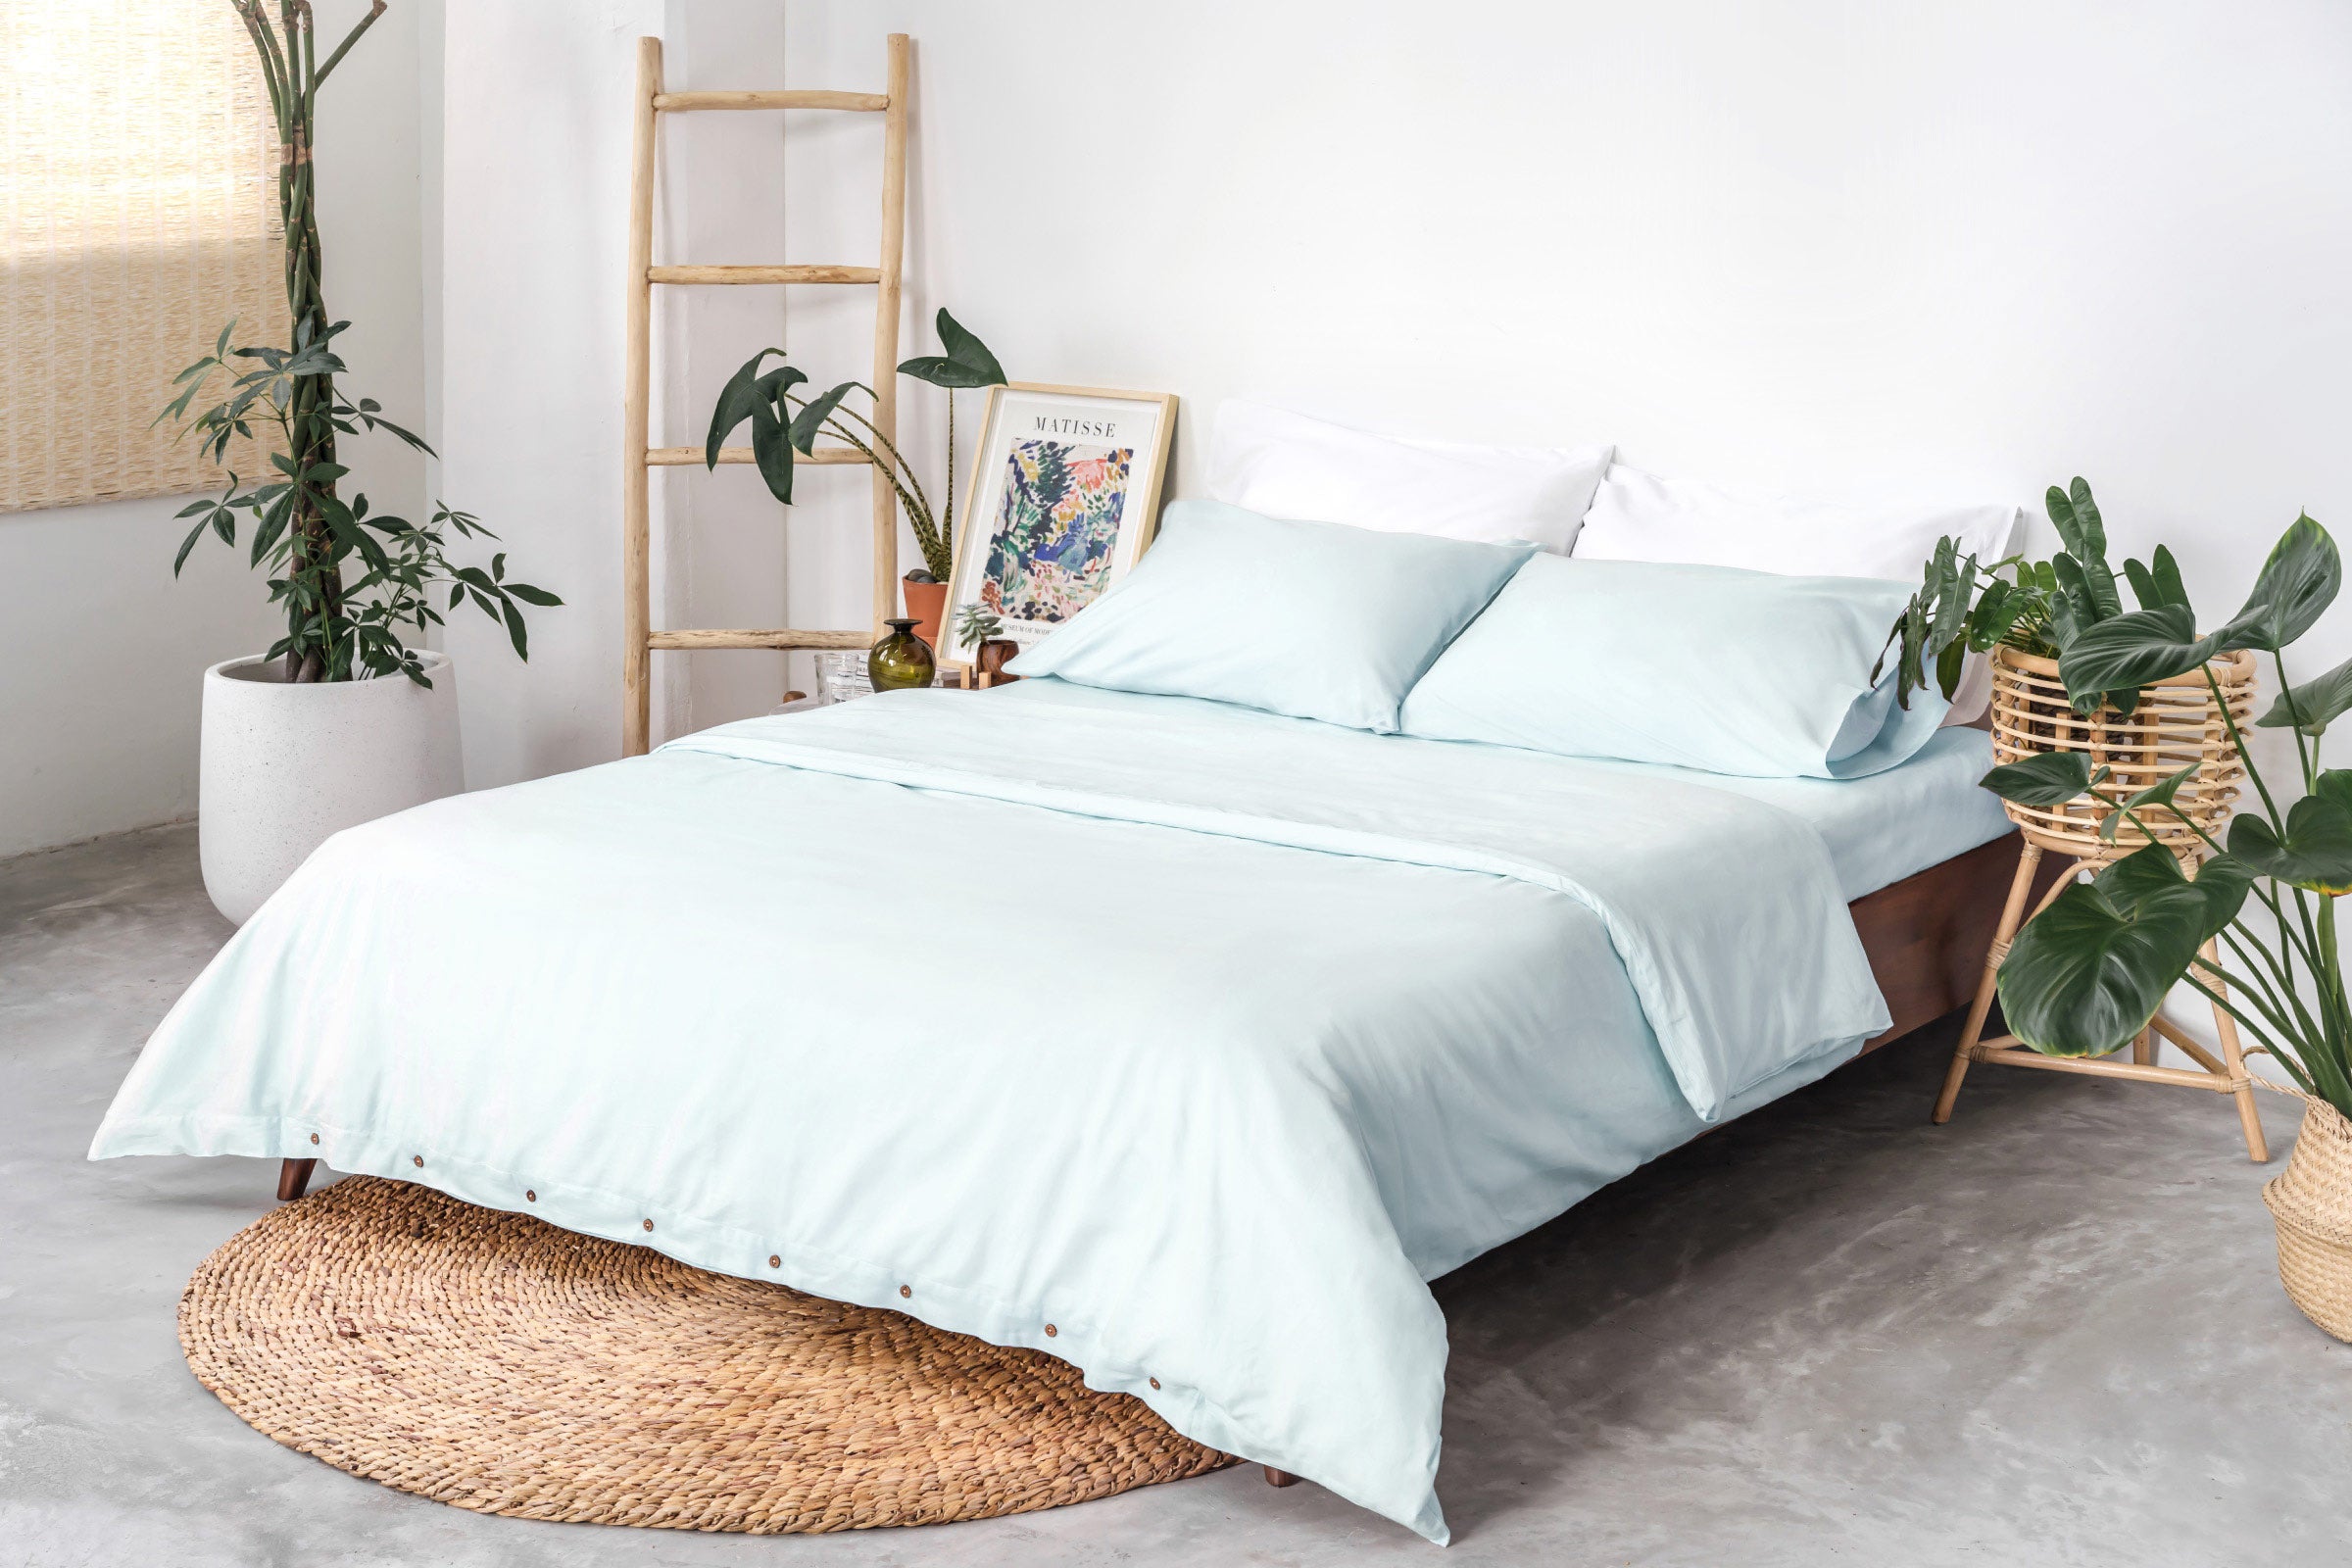 classic-mint-fitted-sheet-duvet-cover-pillowcase-pair-white-pillowcase-pair-side-view-by-sojao.jpg